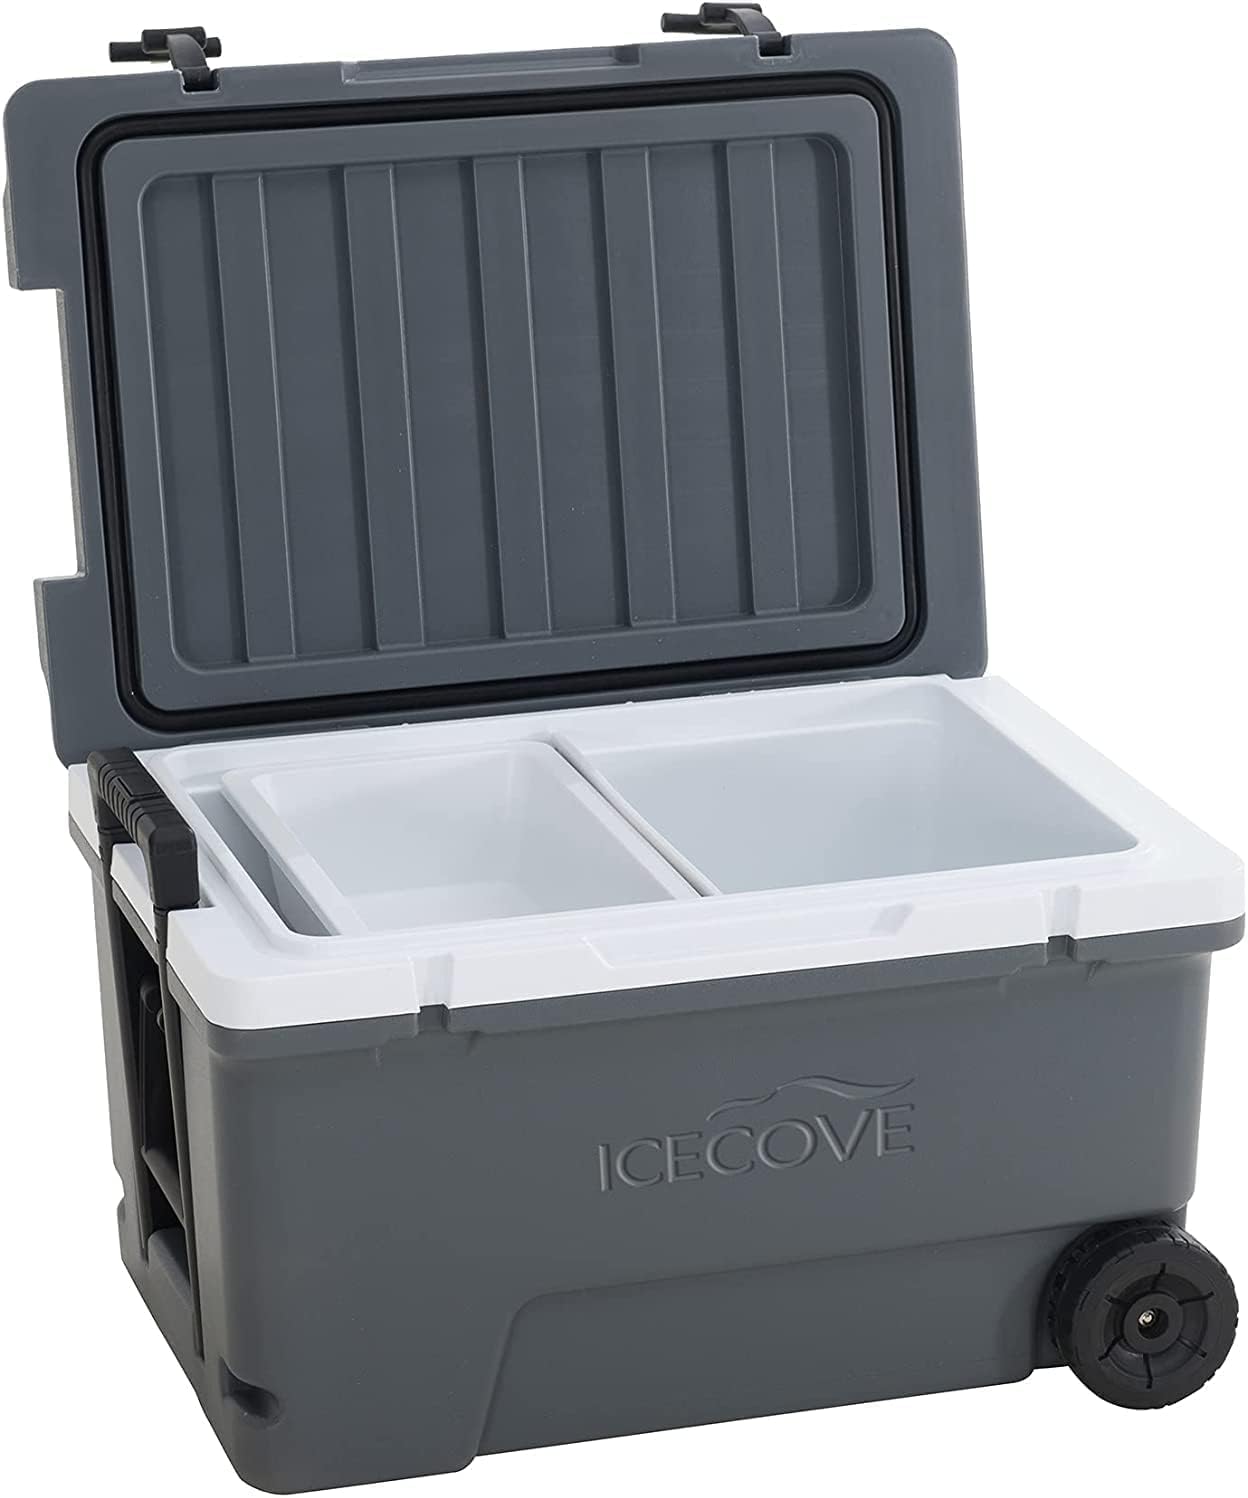 Icecove Ice Cooler Large Capacity